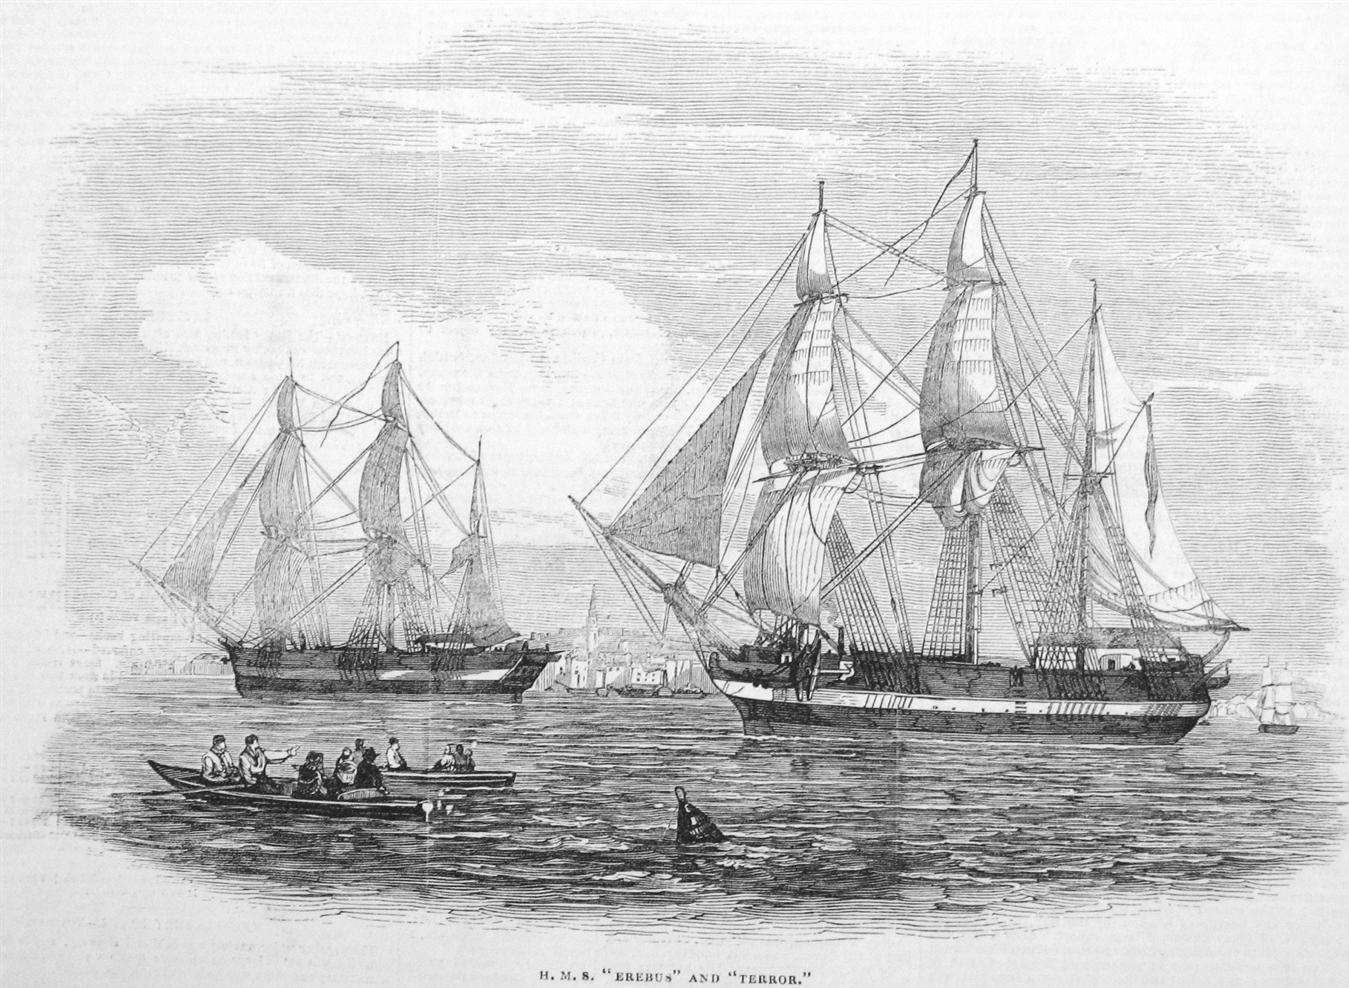 The Terror and the Erebus were used for 129 men to chart the Northwest Passage